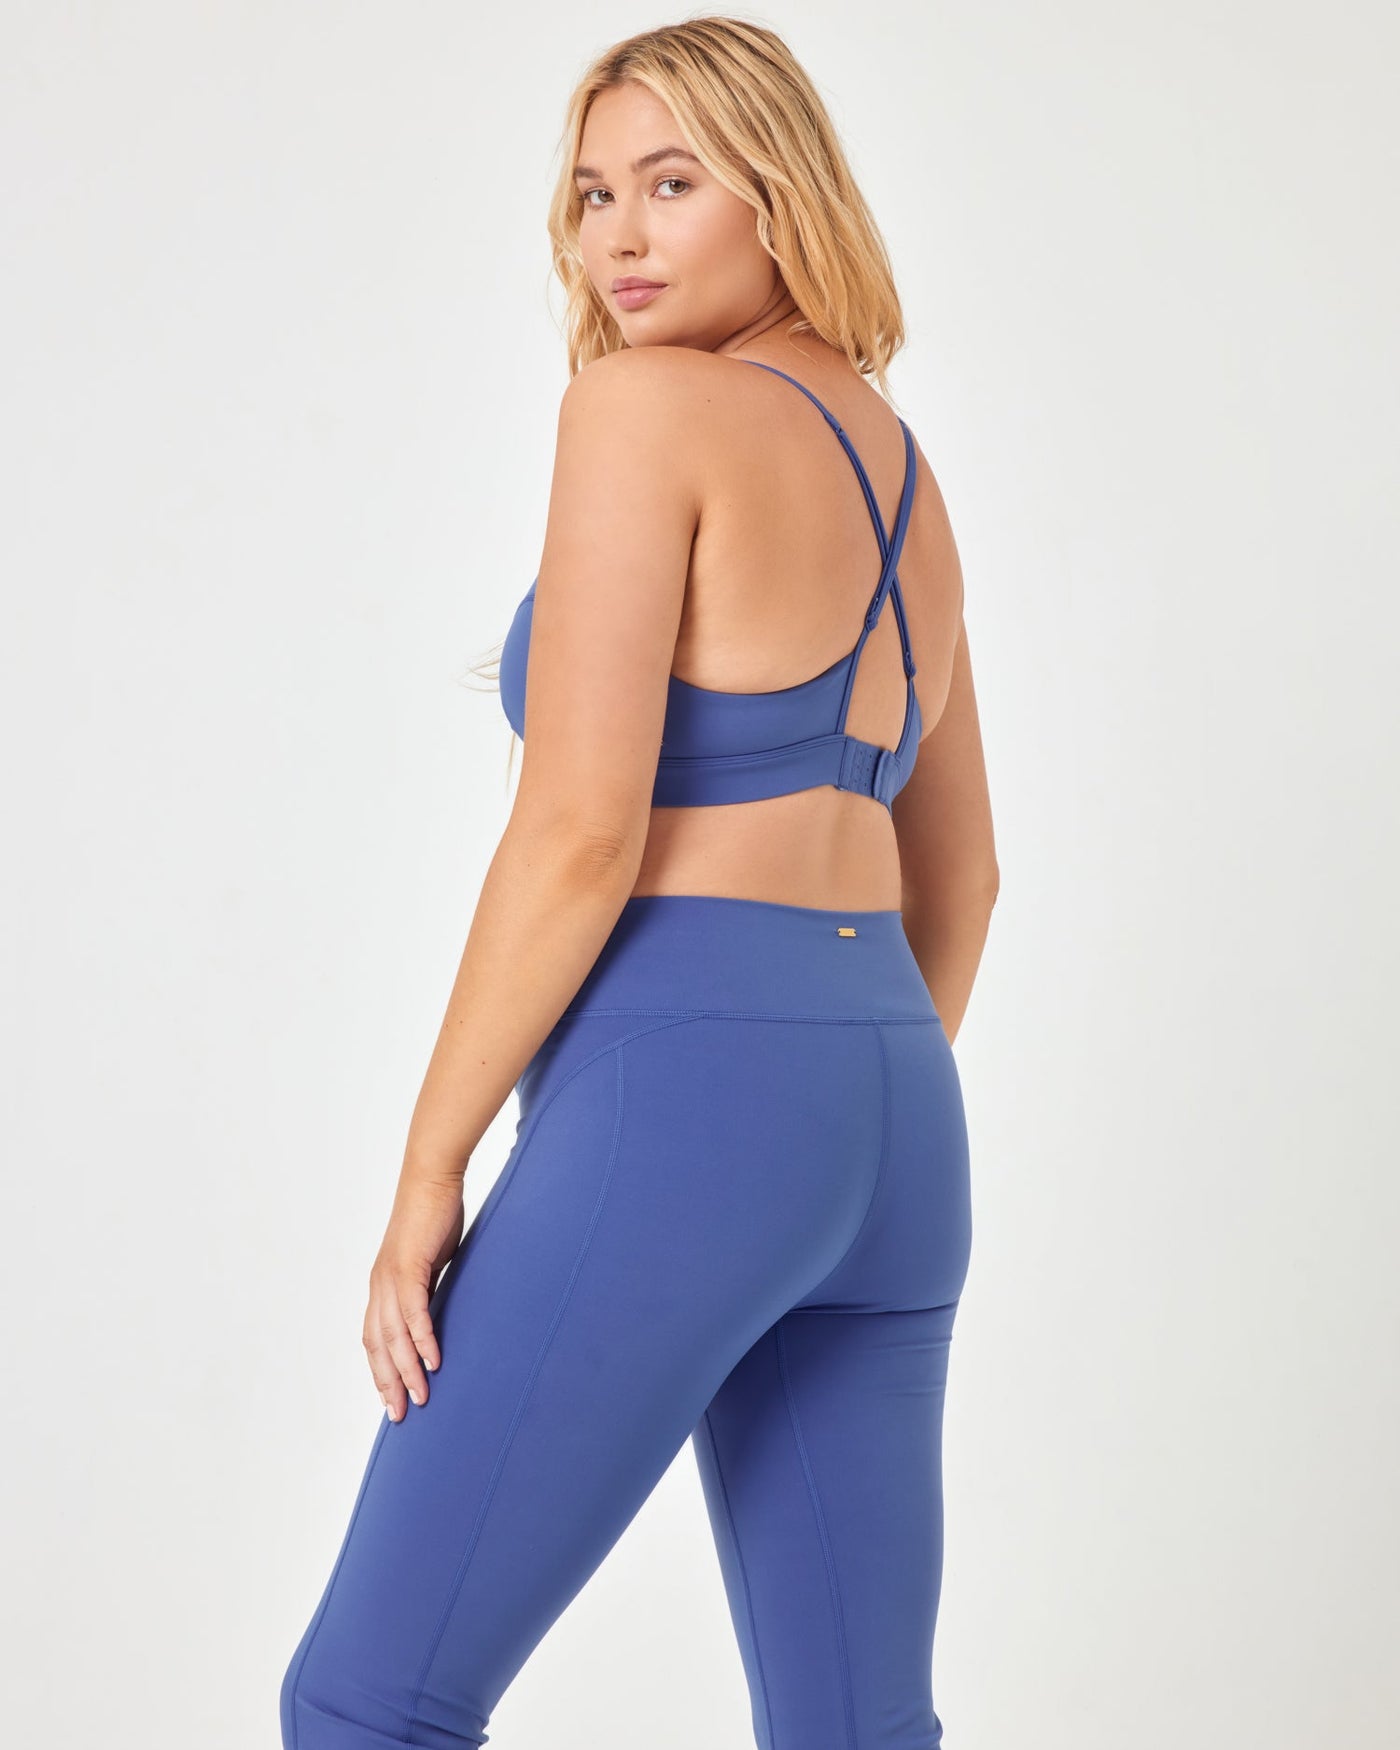 LSPACE Time Out Bra - Blue